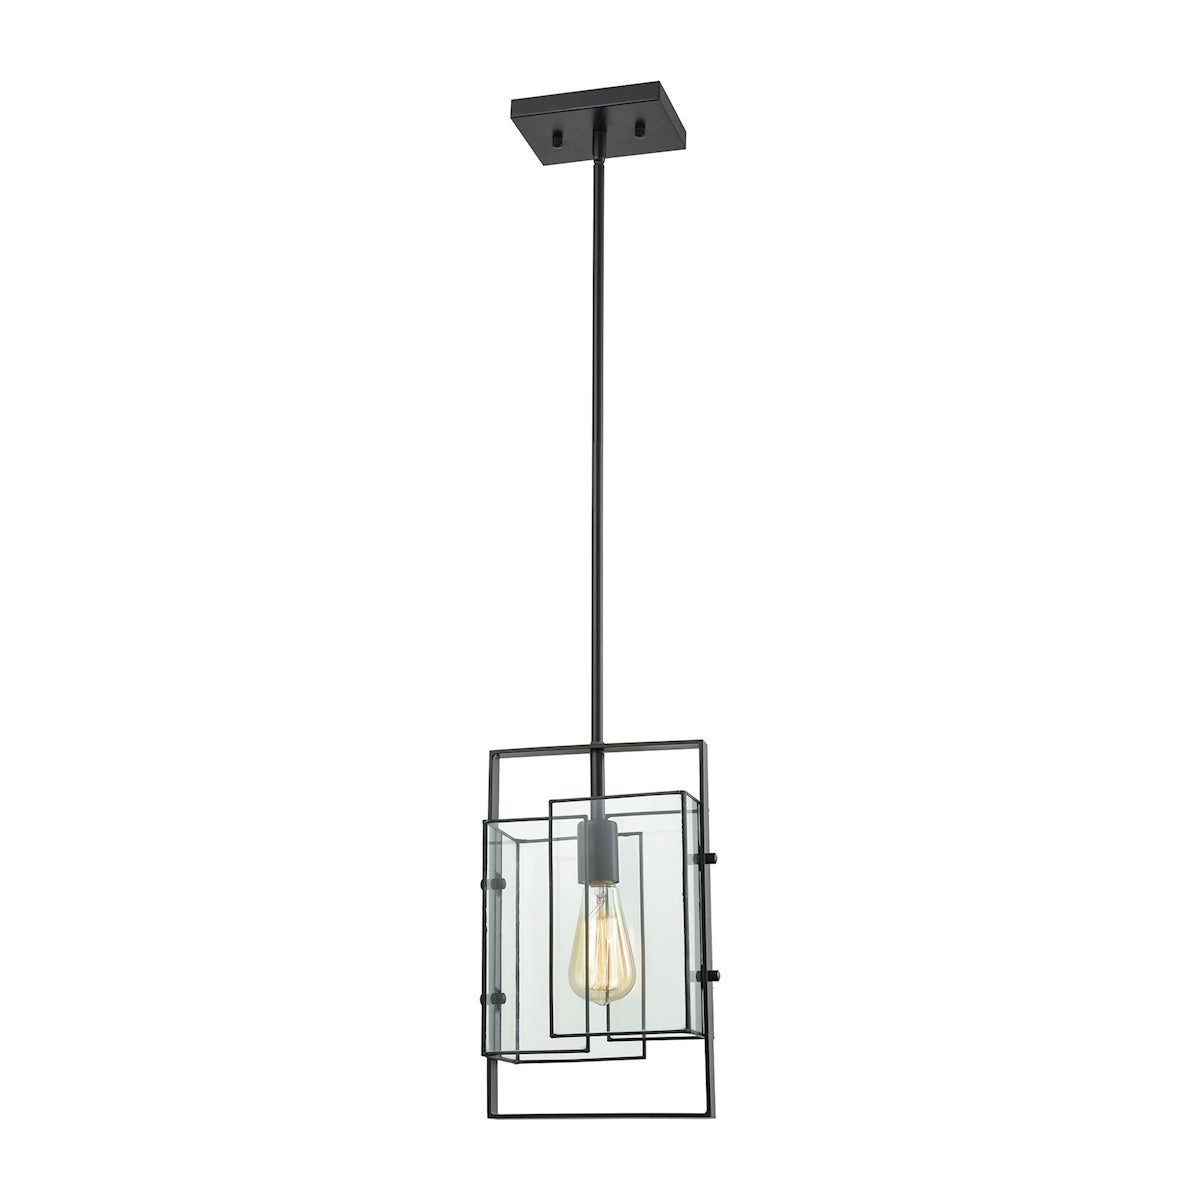 ELK Lighting 72163/1 Stratus 1-Light Mini Pendant in Oil Rubbed Bronze with Clear Glass